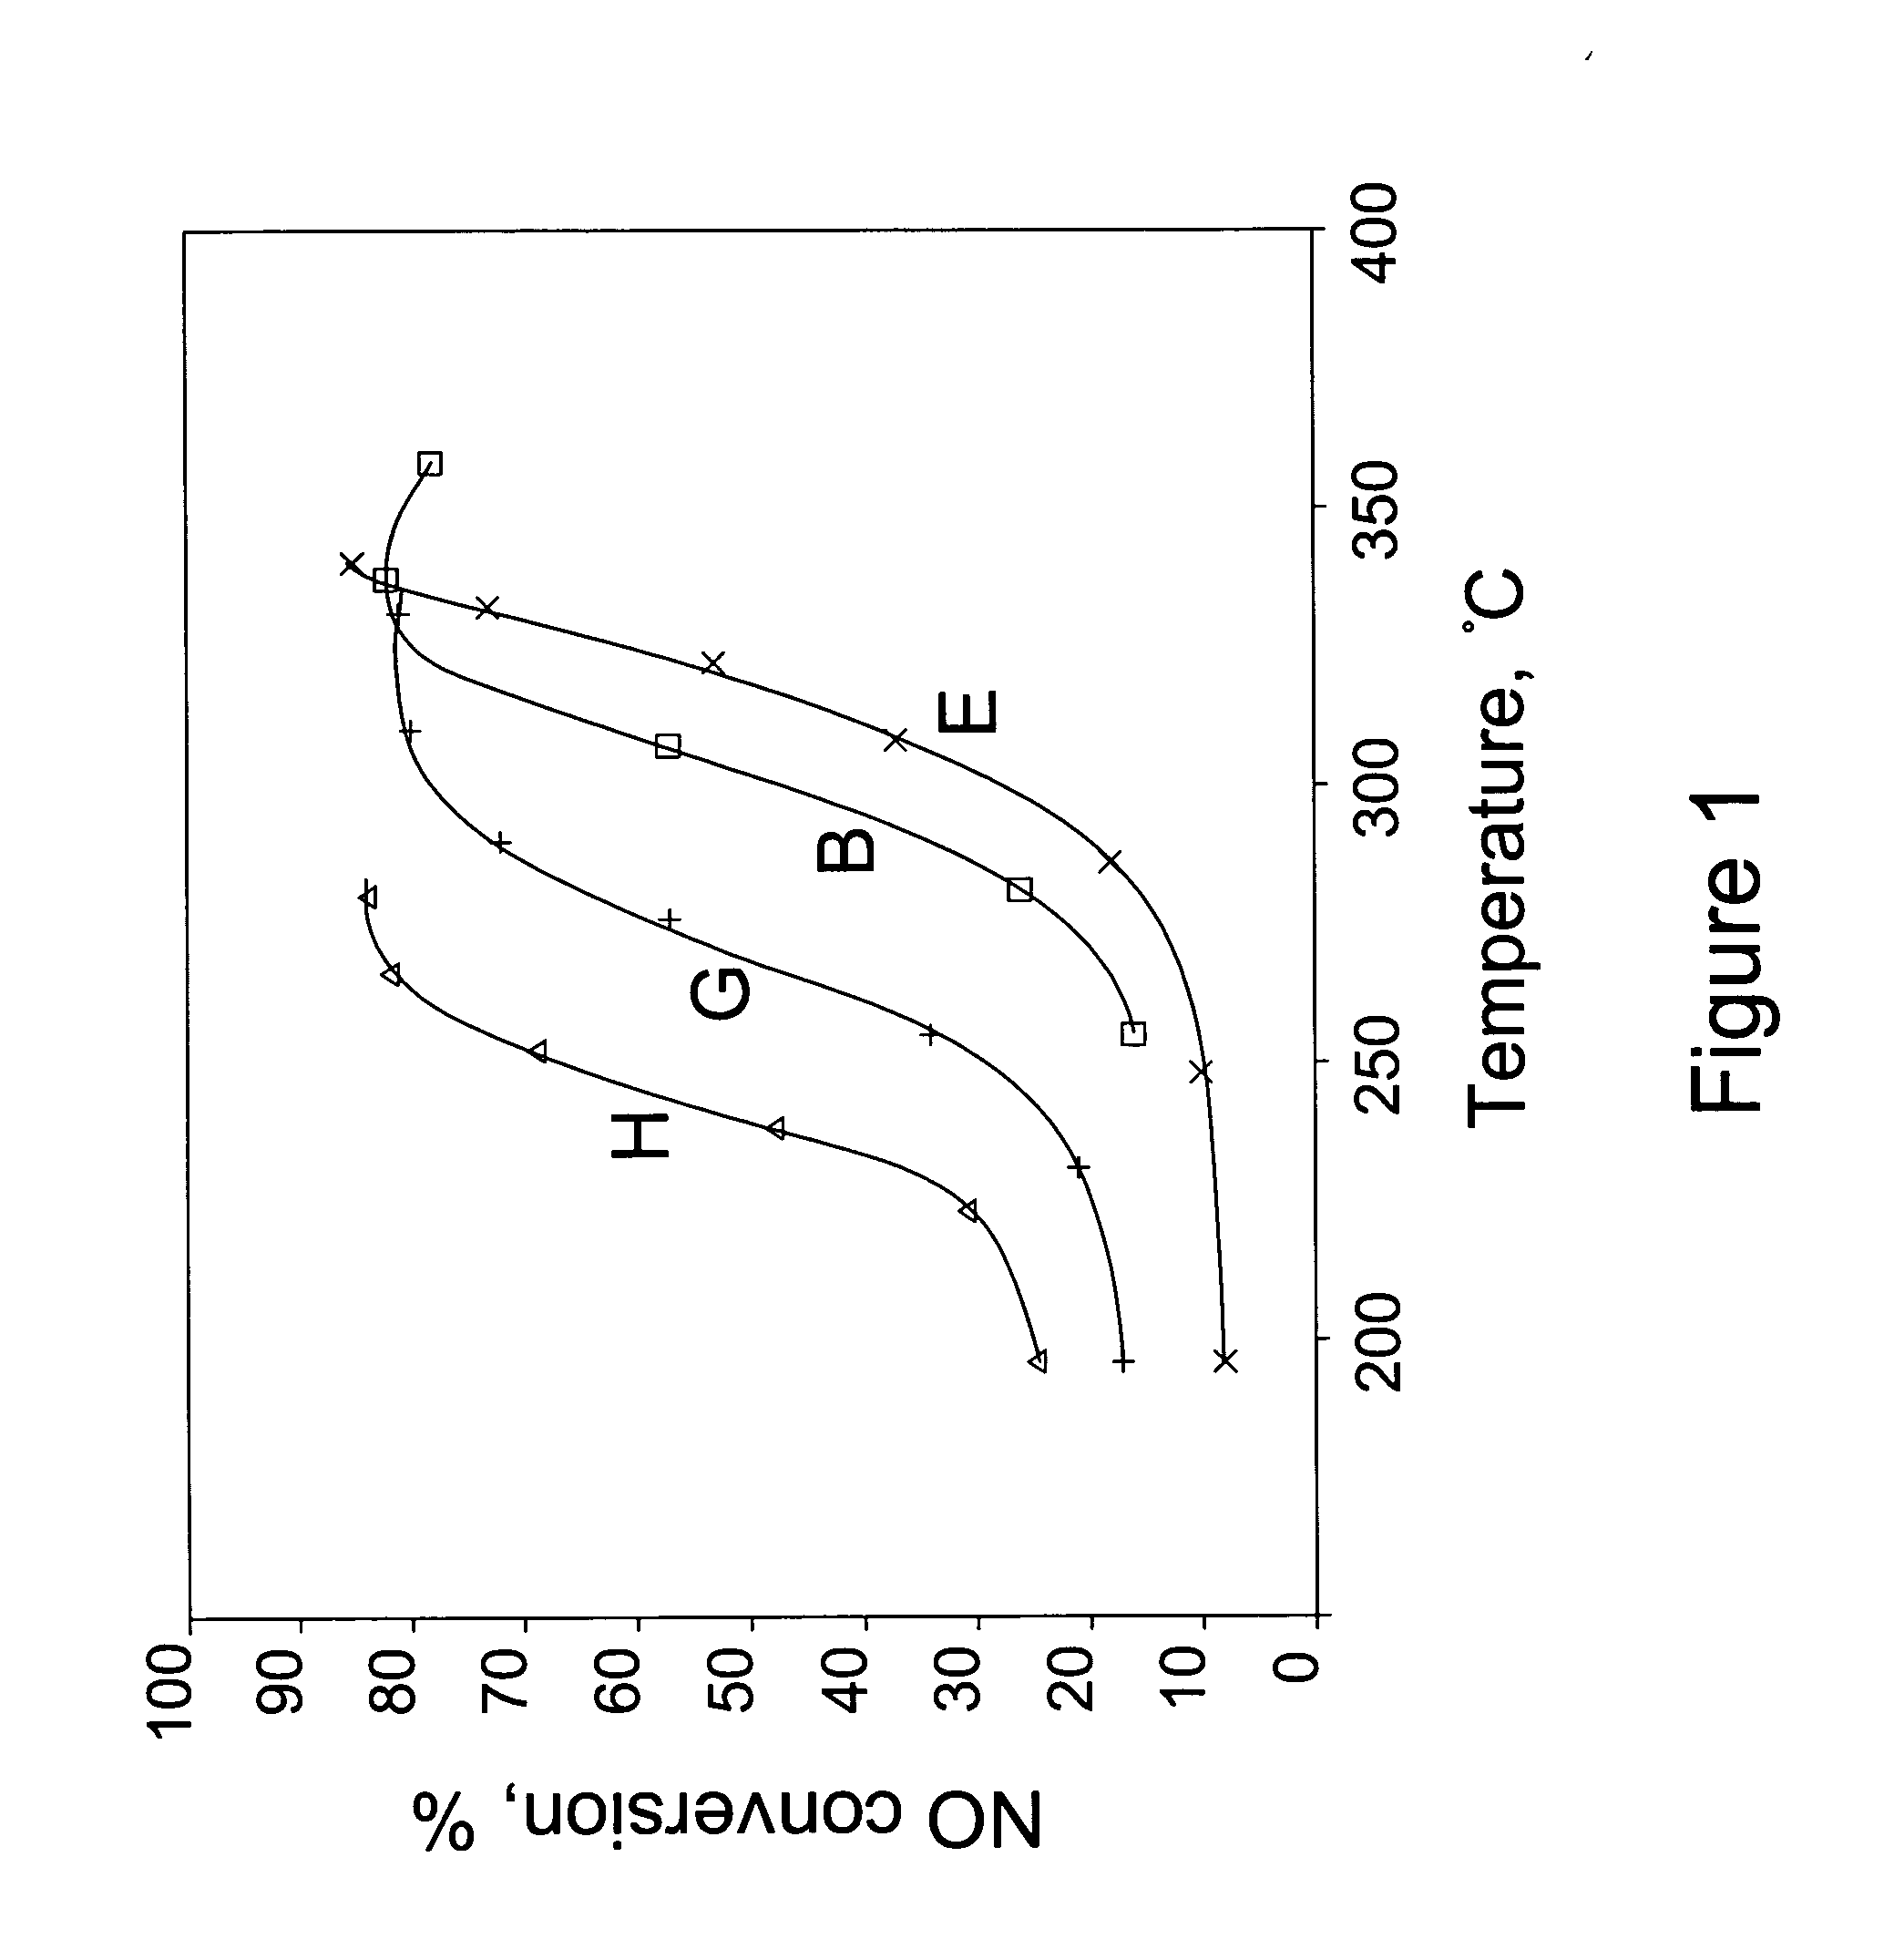 Catalyst, a method of using a catalyst, and an arrangement including a catalyst, for controlling NO and/or CO emissions from a combustion system without using external reagent